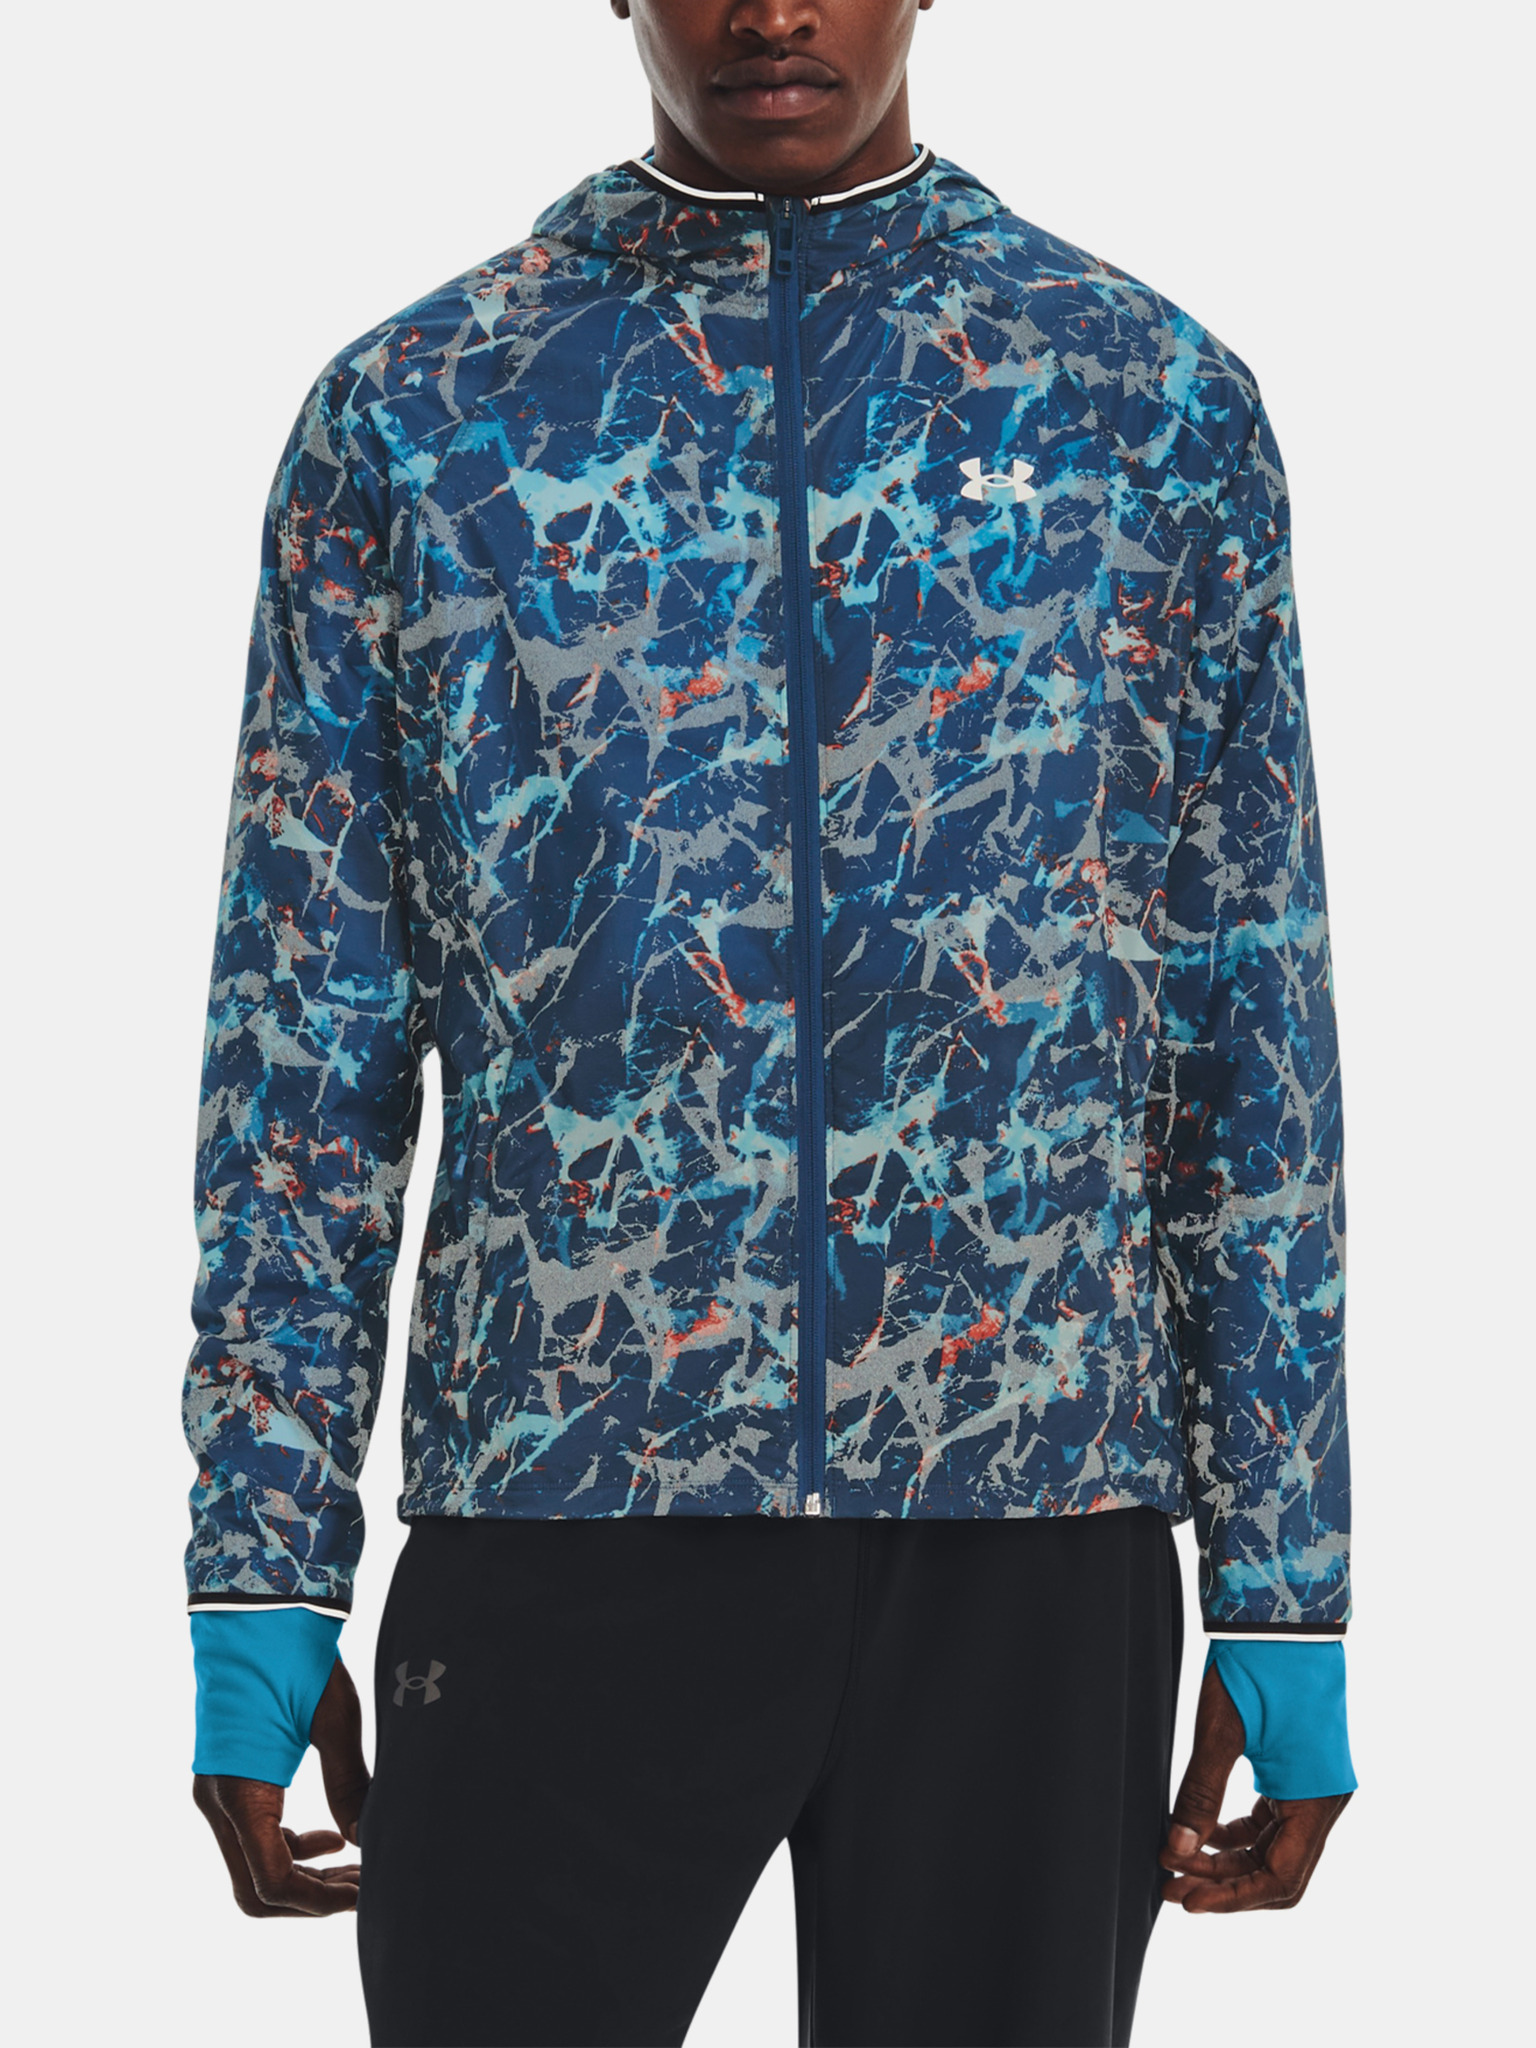 Under Armour Ua Outrun The Storm Jacket in Blue for Men